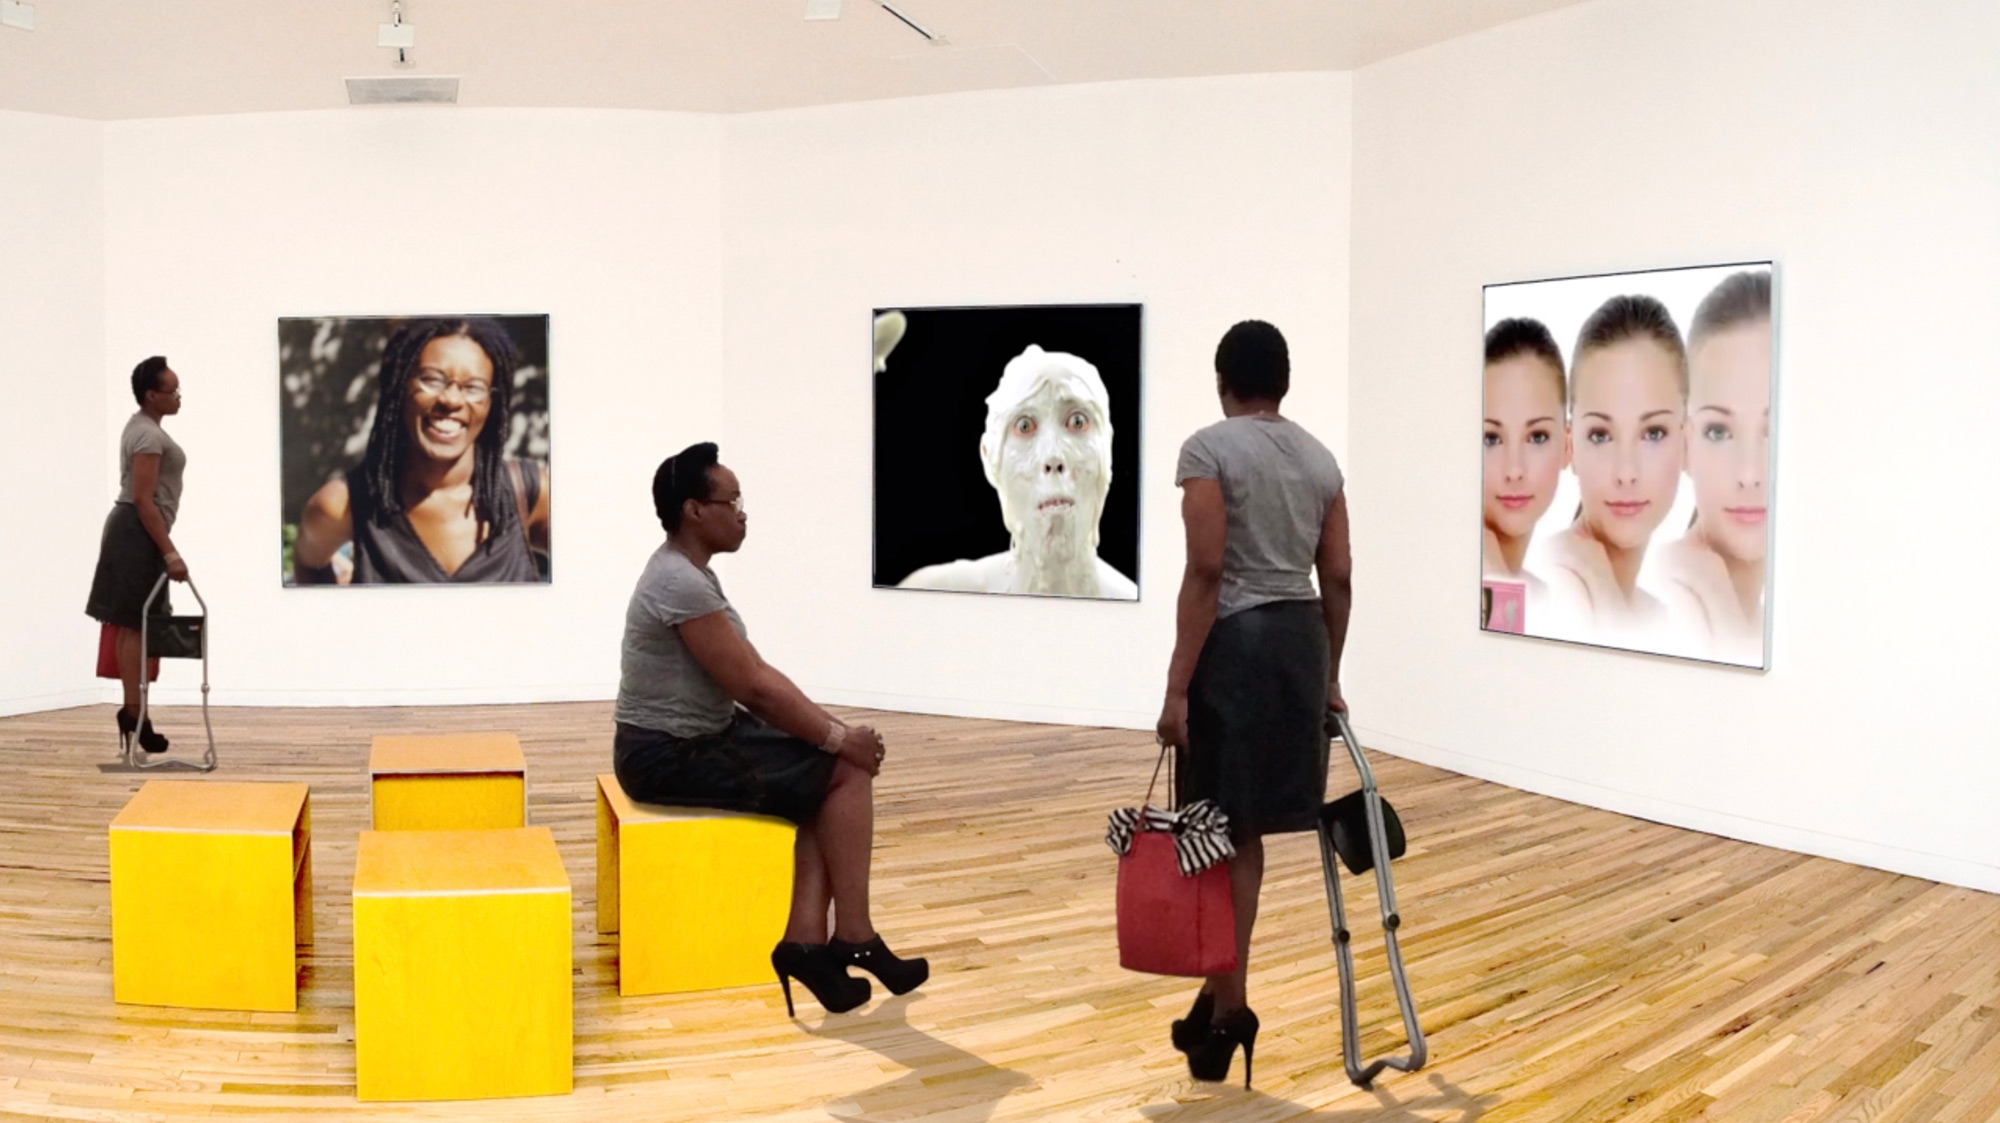 <i>John Lucas and Claudia Rankine: Situations</i> installation view at the Eli and Edythe Broad Art Museum at Michigan State University, 2020. Photo: Eat Pomegranate Photography.